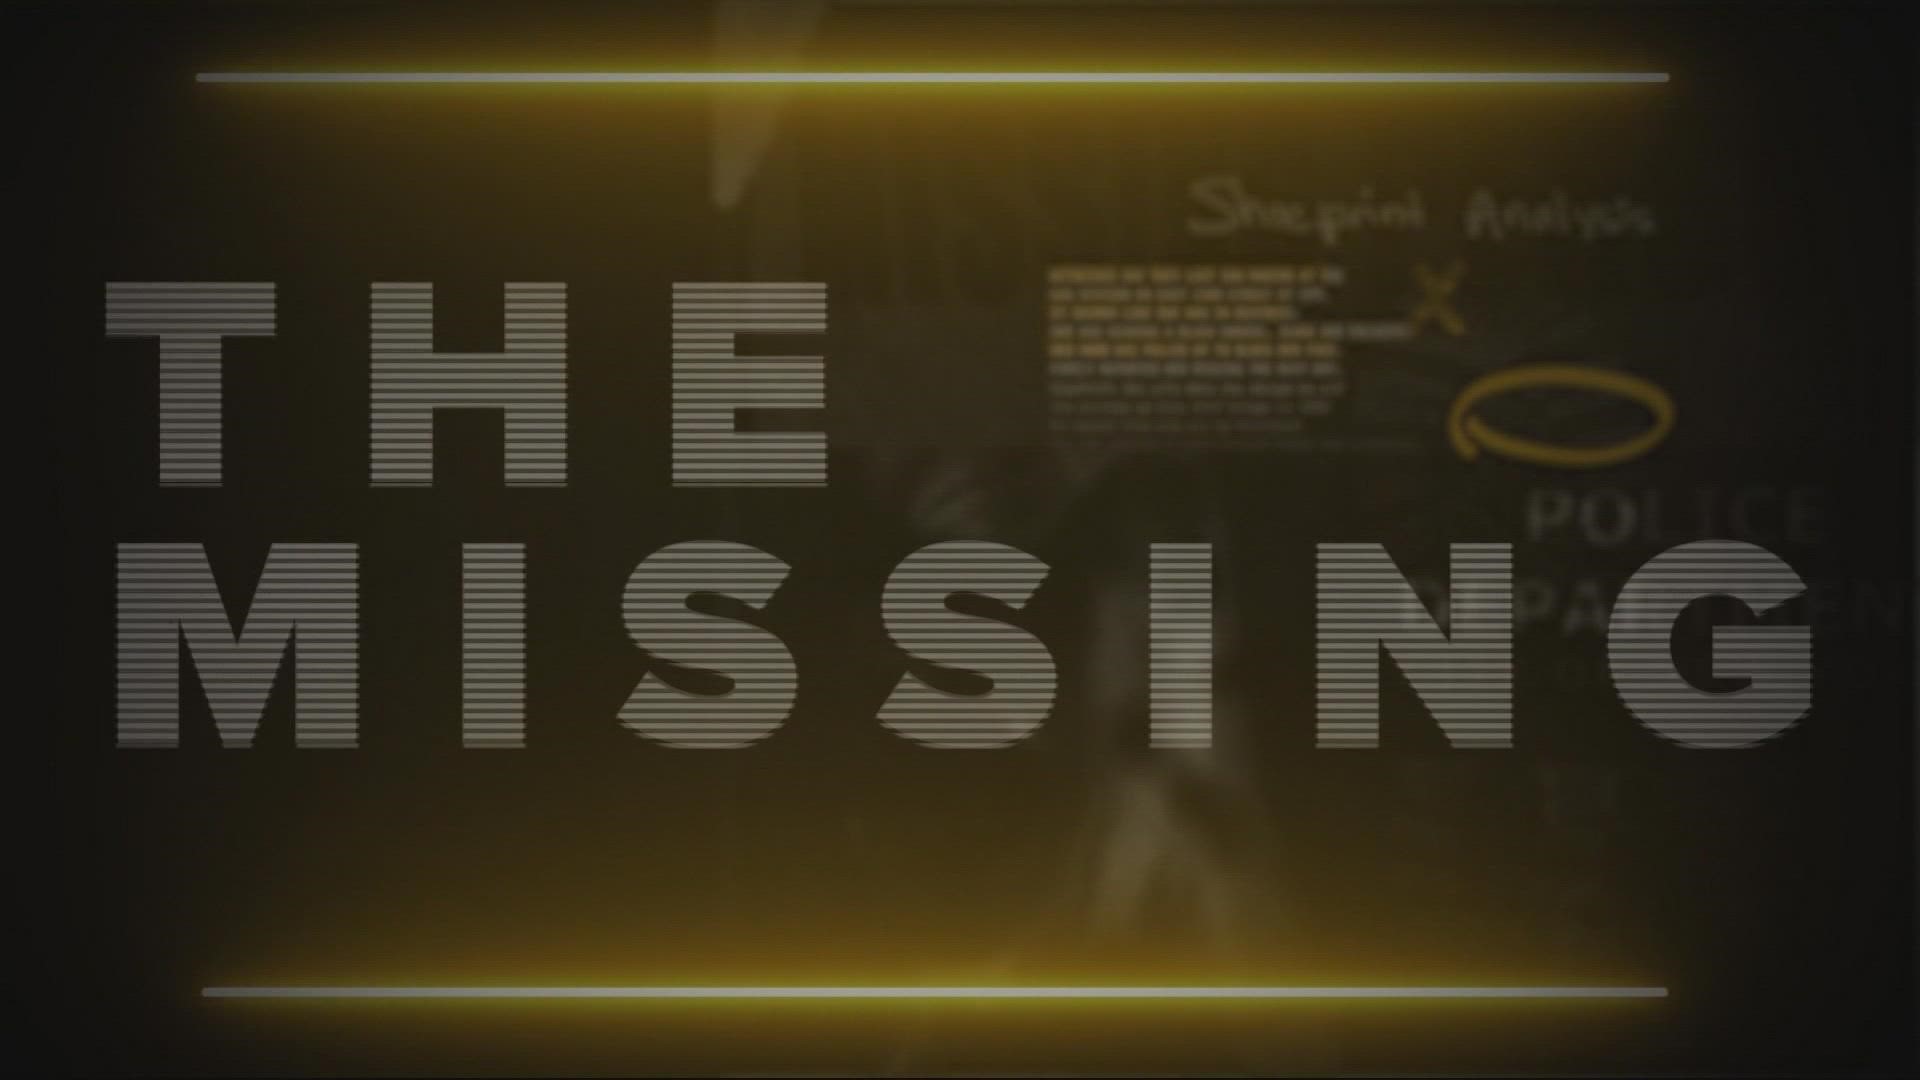 You could be the key to help crack missing persons cases across the Tampa Bay area.